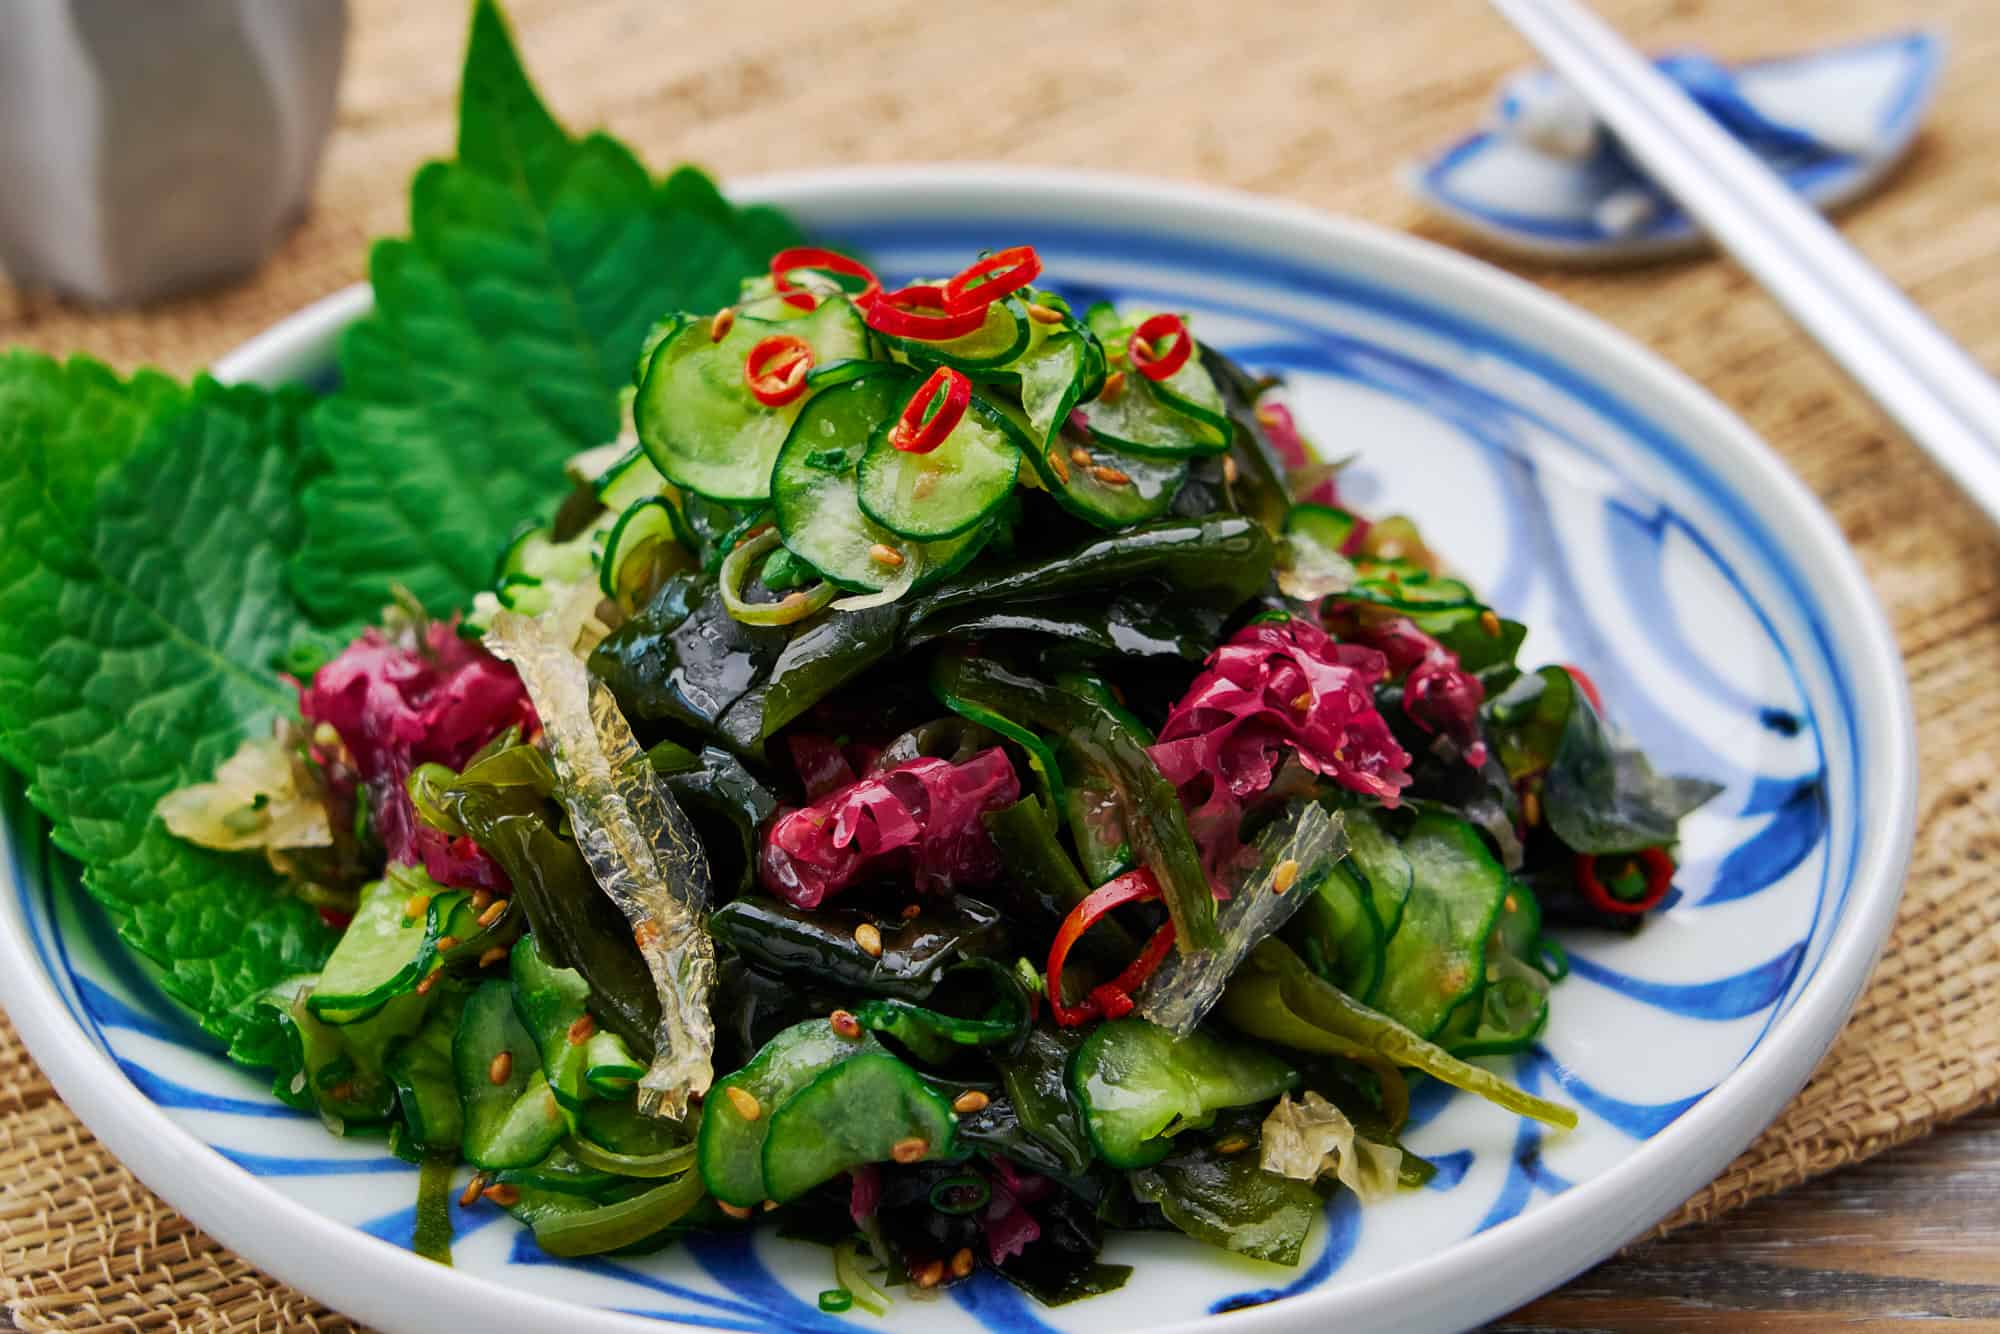 A mouthwatering plate of Japanese seaweed salad with a mix of wakame, konbu, agar, and other seaweed, along with crispy cucumbers and a nutty sesame dressing.